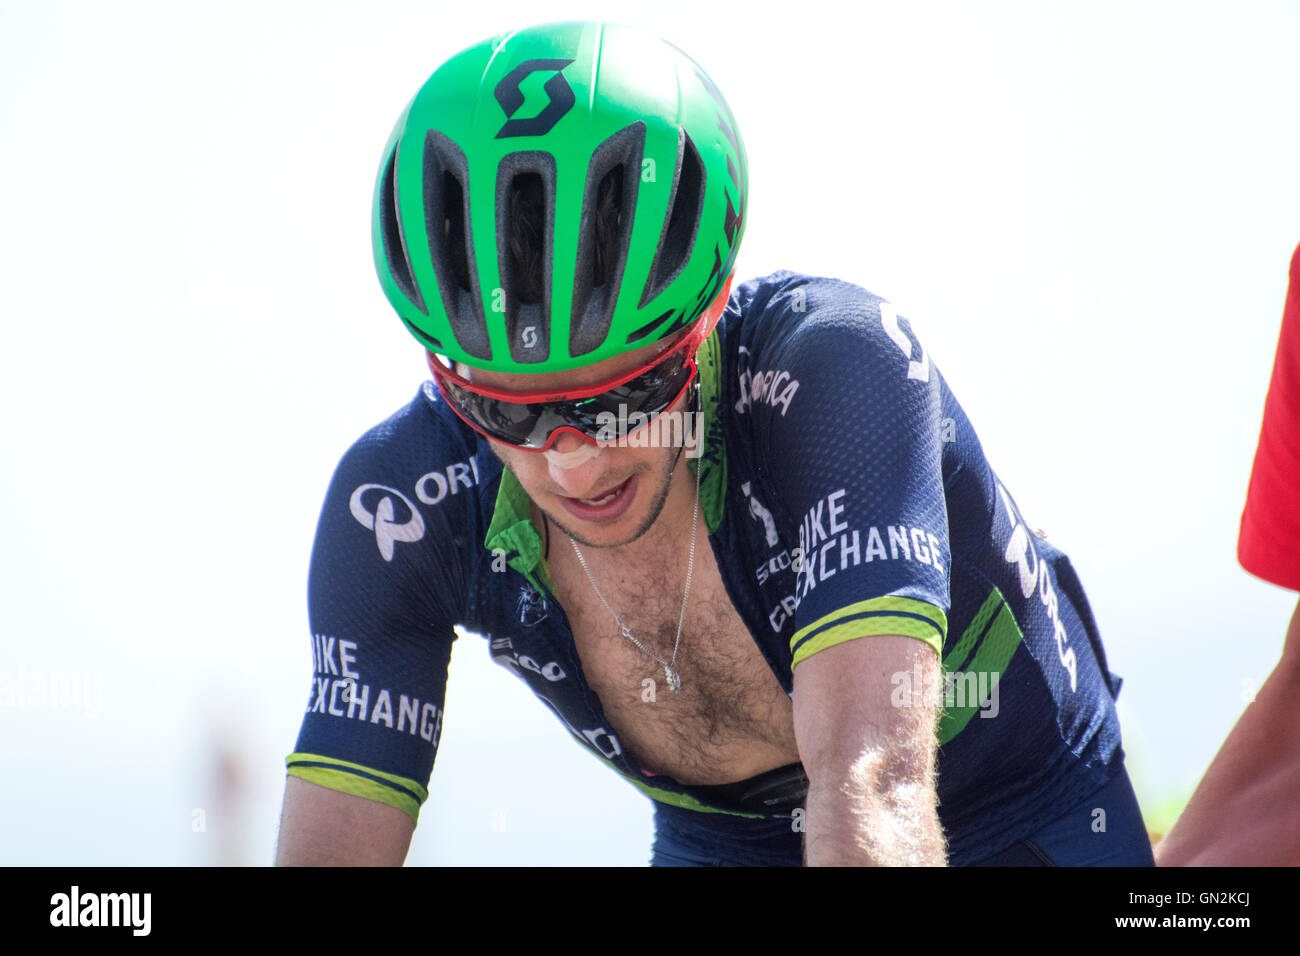 La Camperona, Spain. 27th August, 2016. Simon Yates (Orica - Bikeexchange) finishes the 8th stage of cycling race ‘La Vuelta a España’ (Tour of Spain) between Villalpando and Climb of La Camperona on August 27, 2016 in Leon, Spain. Credit: David Gato/Alamy Live News Stock Photo